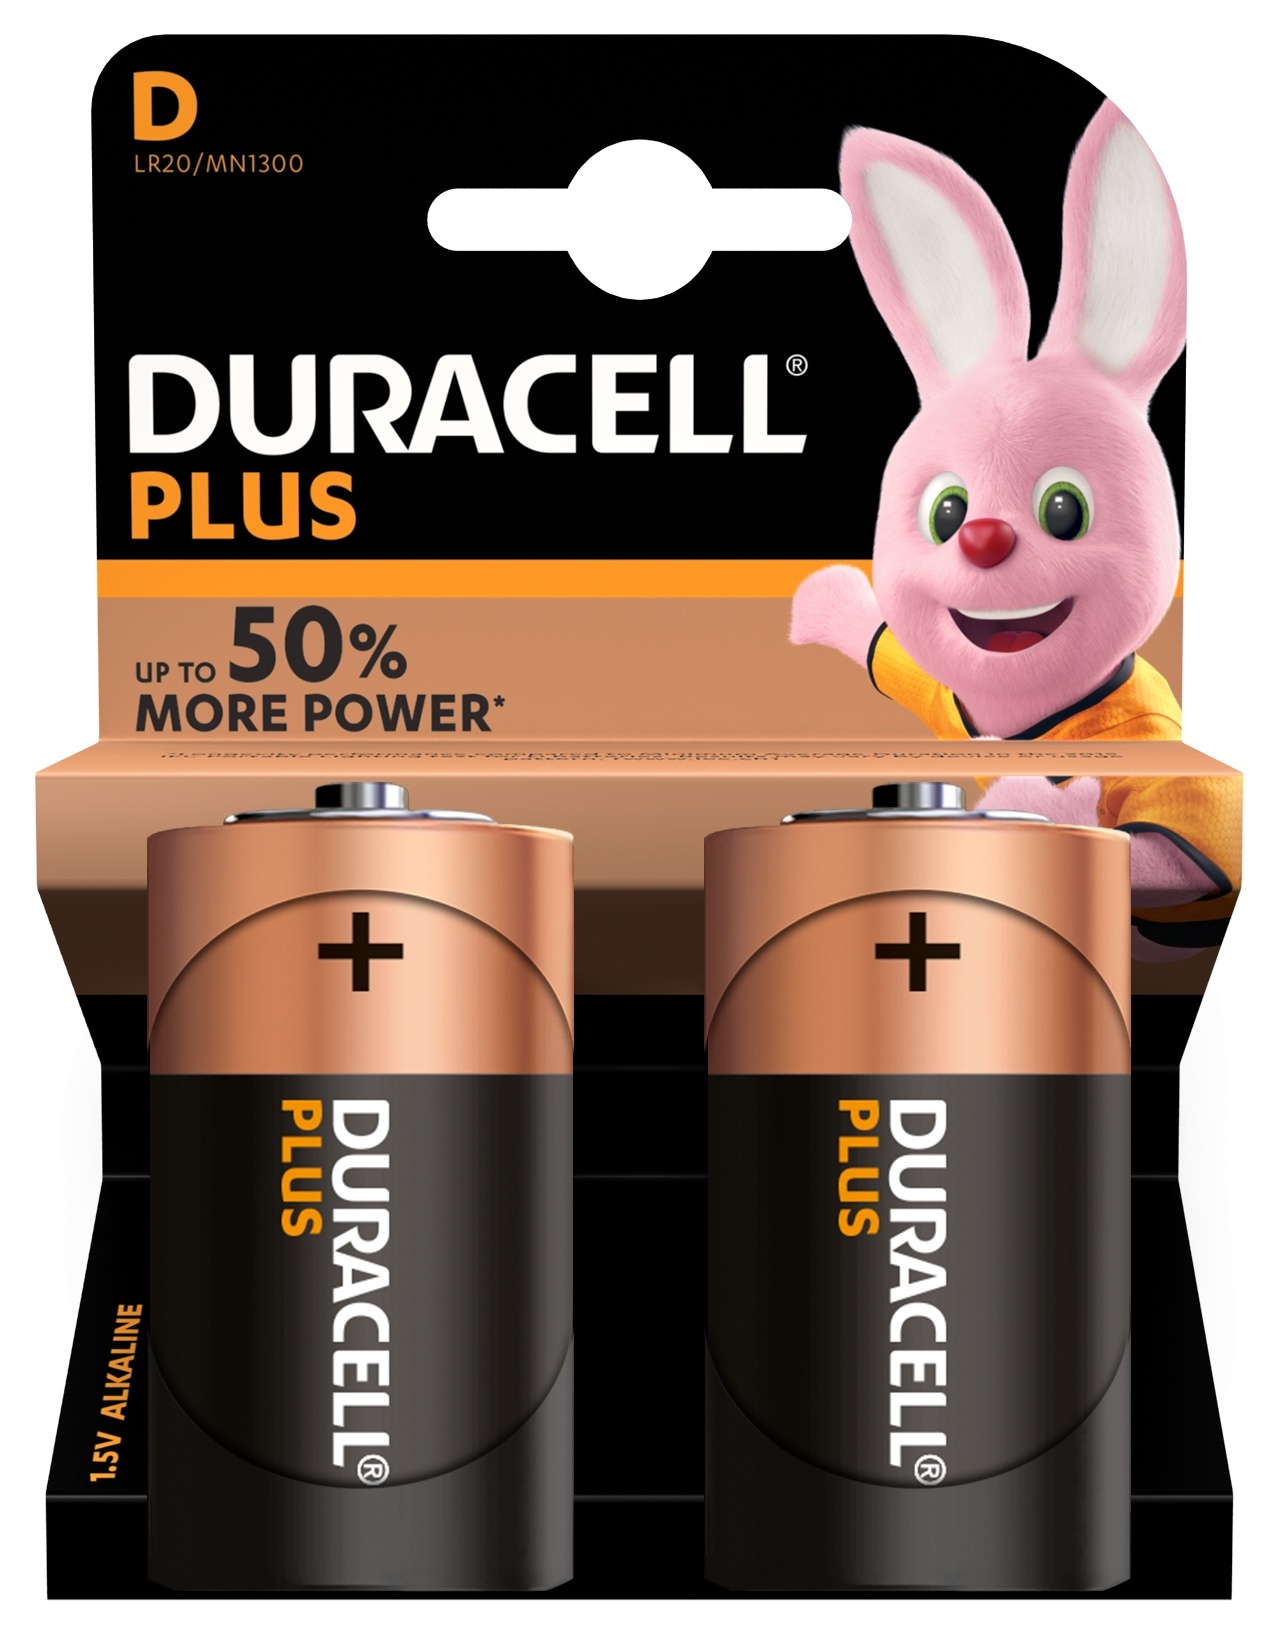 Battery MONO / LR20 / D only 2,50 € buy now